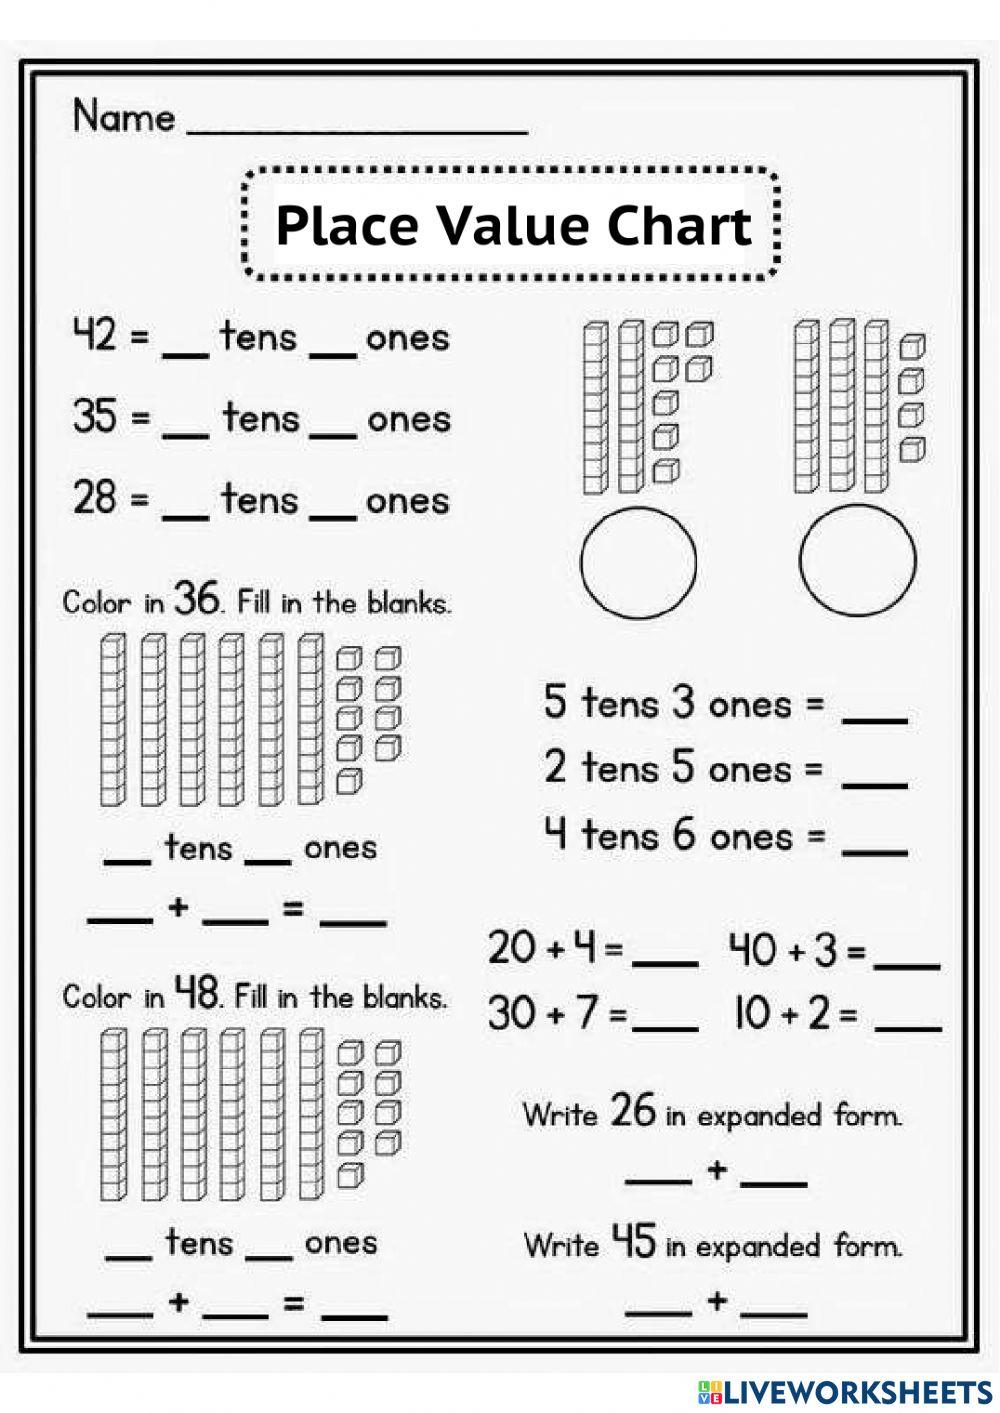 Place Value Chart - Numbers to 40